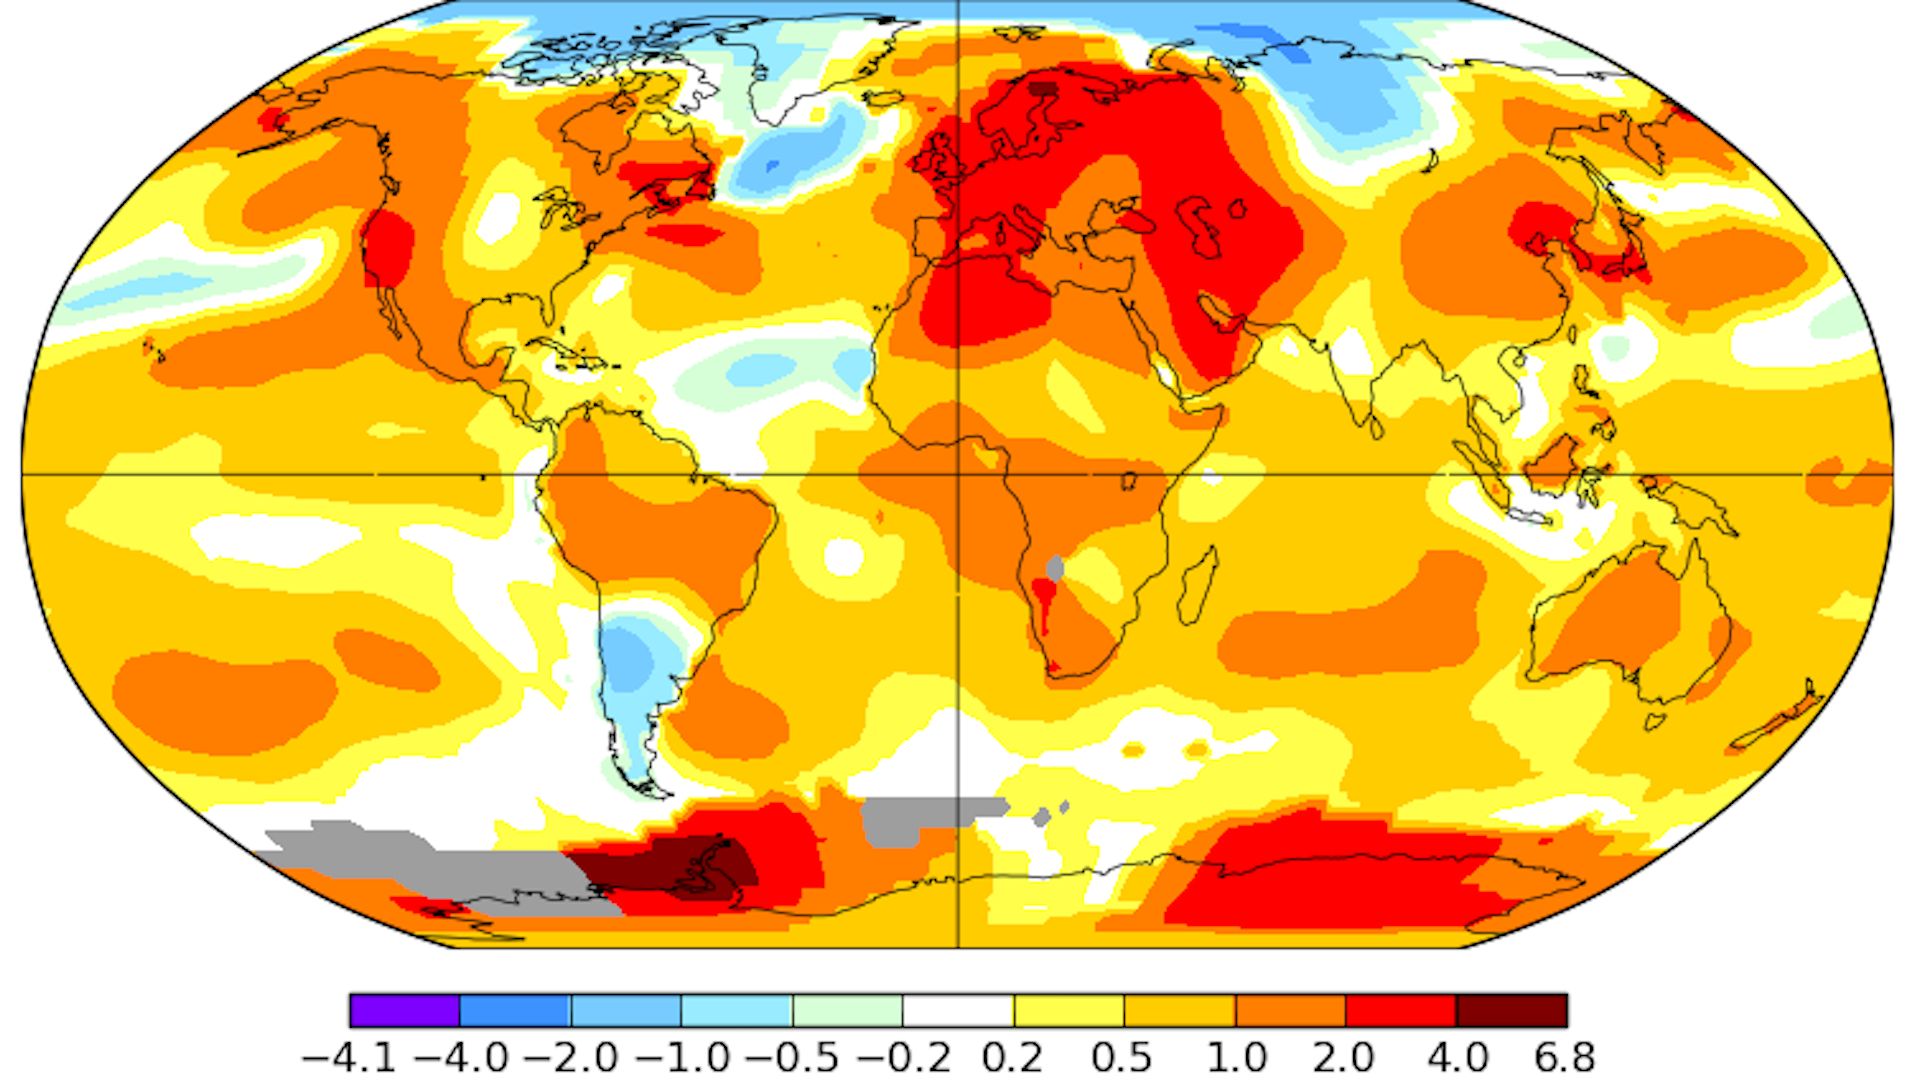 According to NOAA, 2014 was the warmest summer on Earth since records began in 1880.